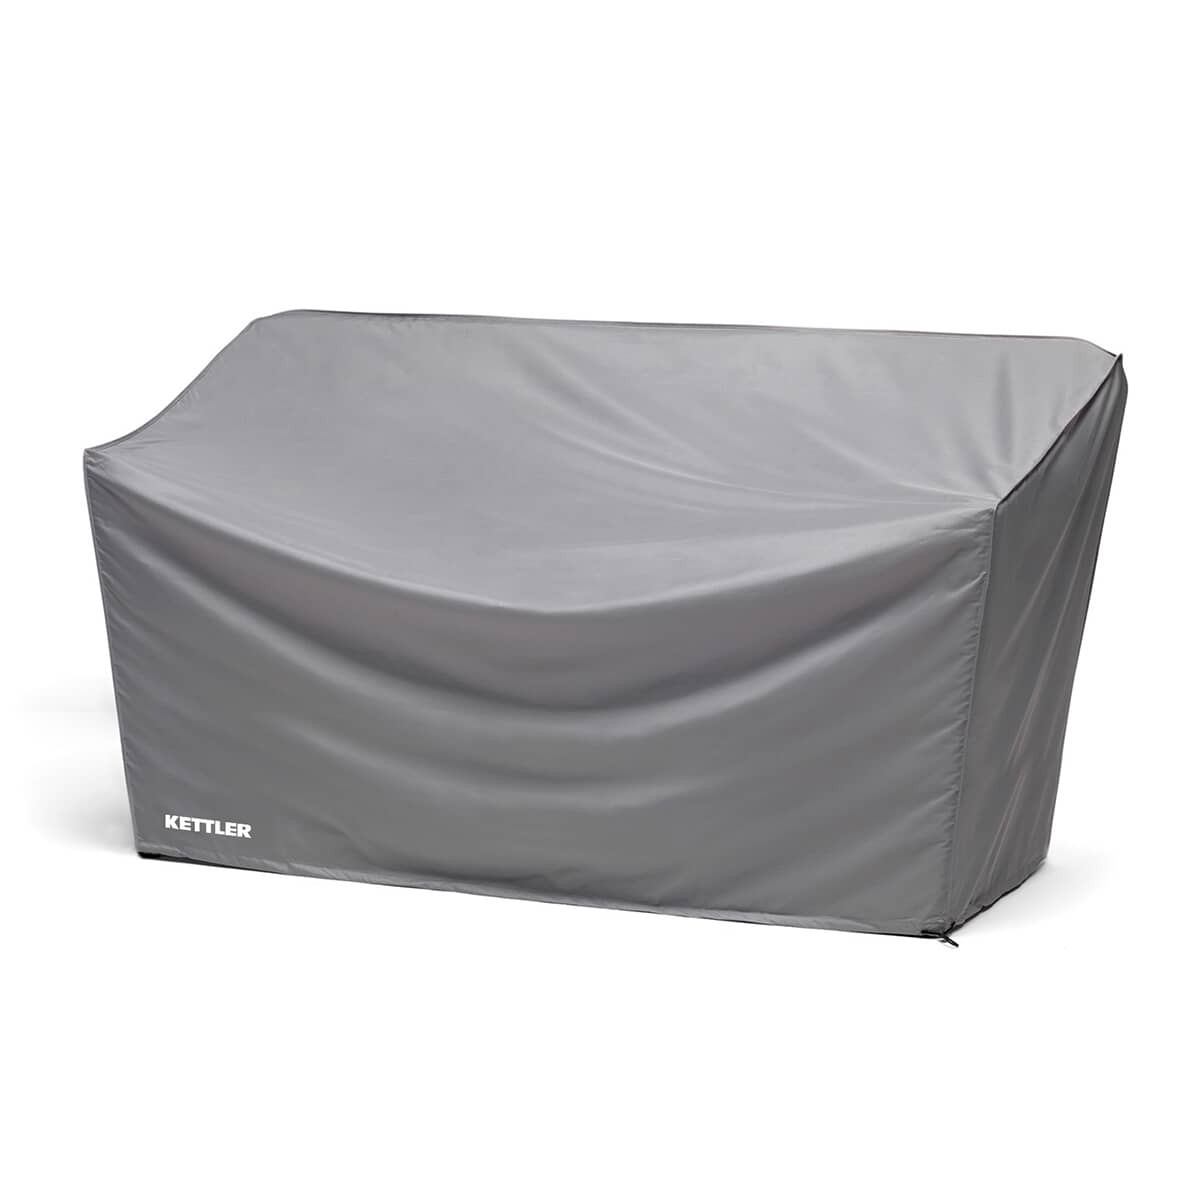 Kettler Protective Cover for Palma Daybed